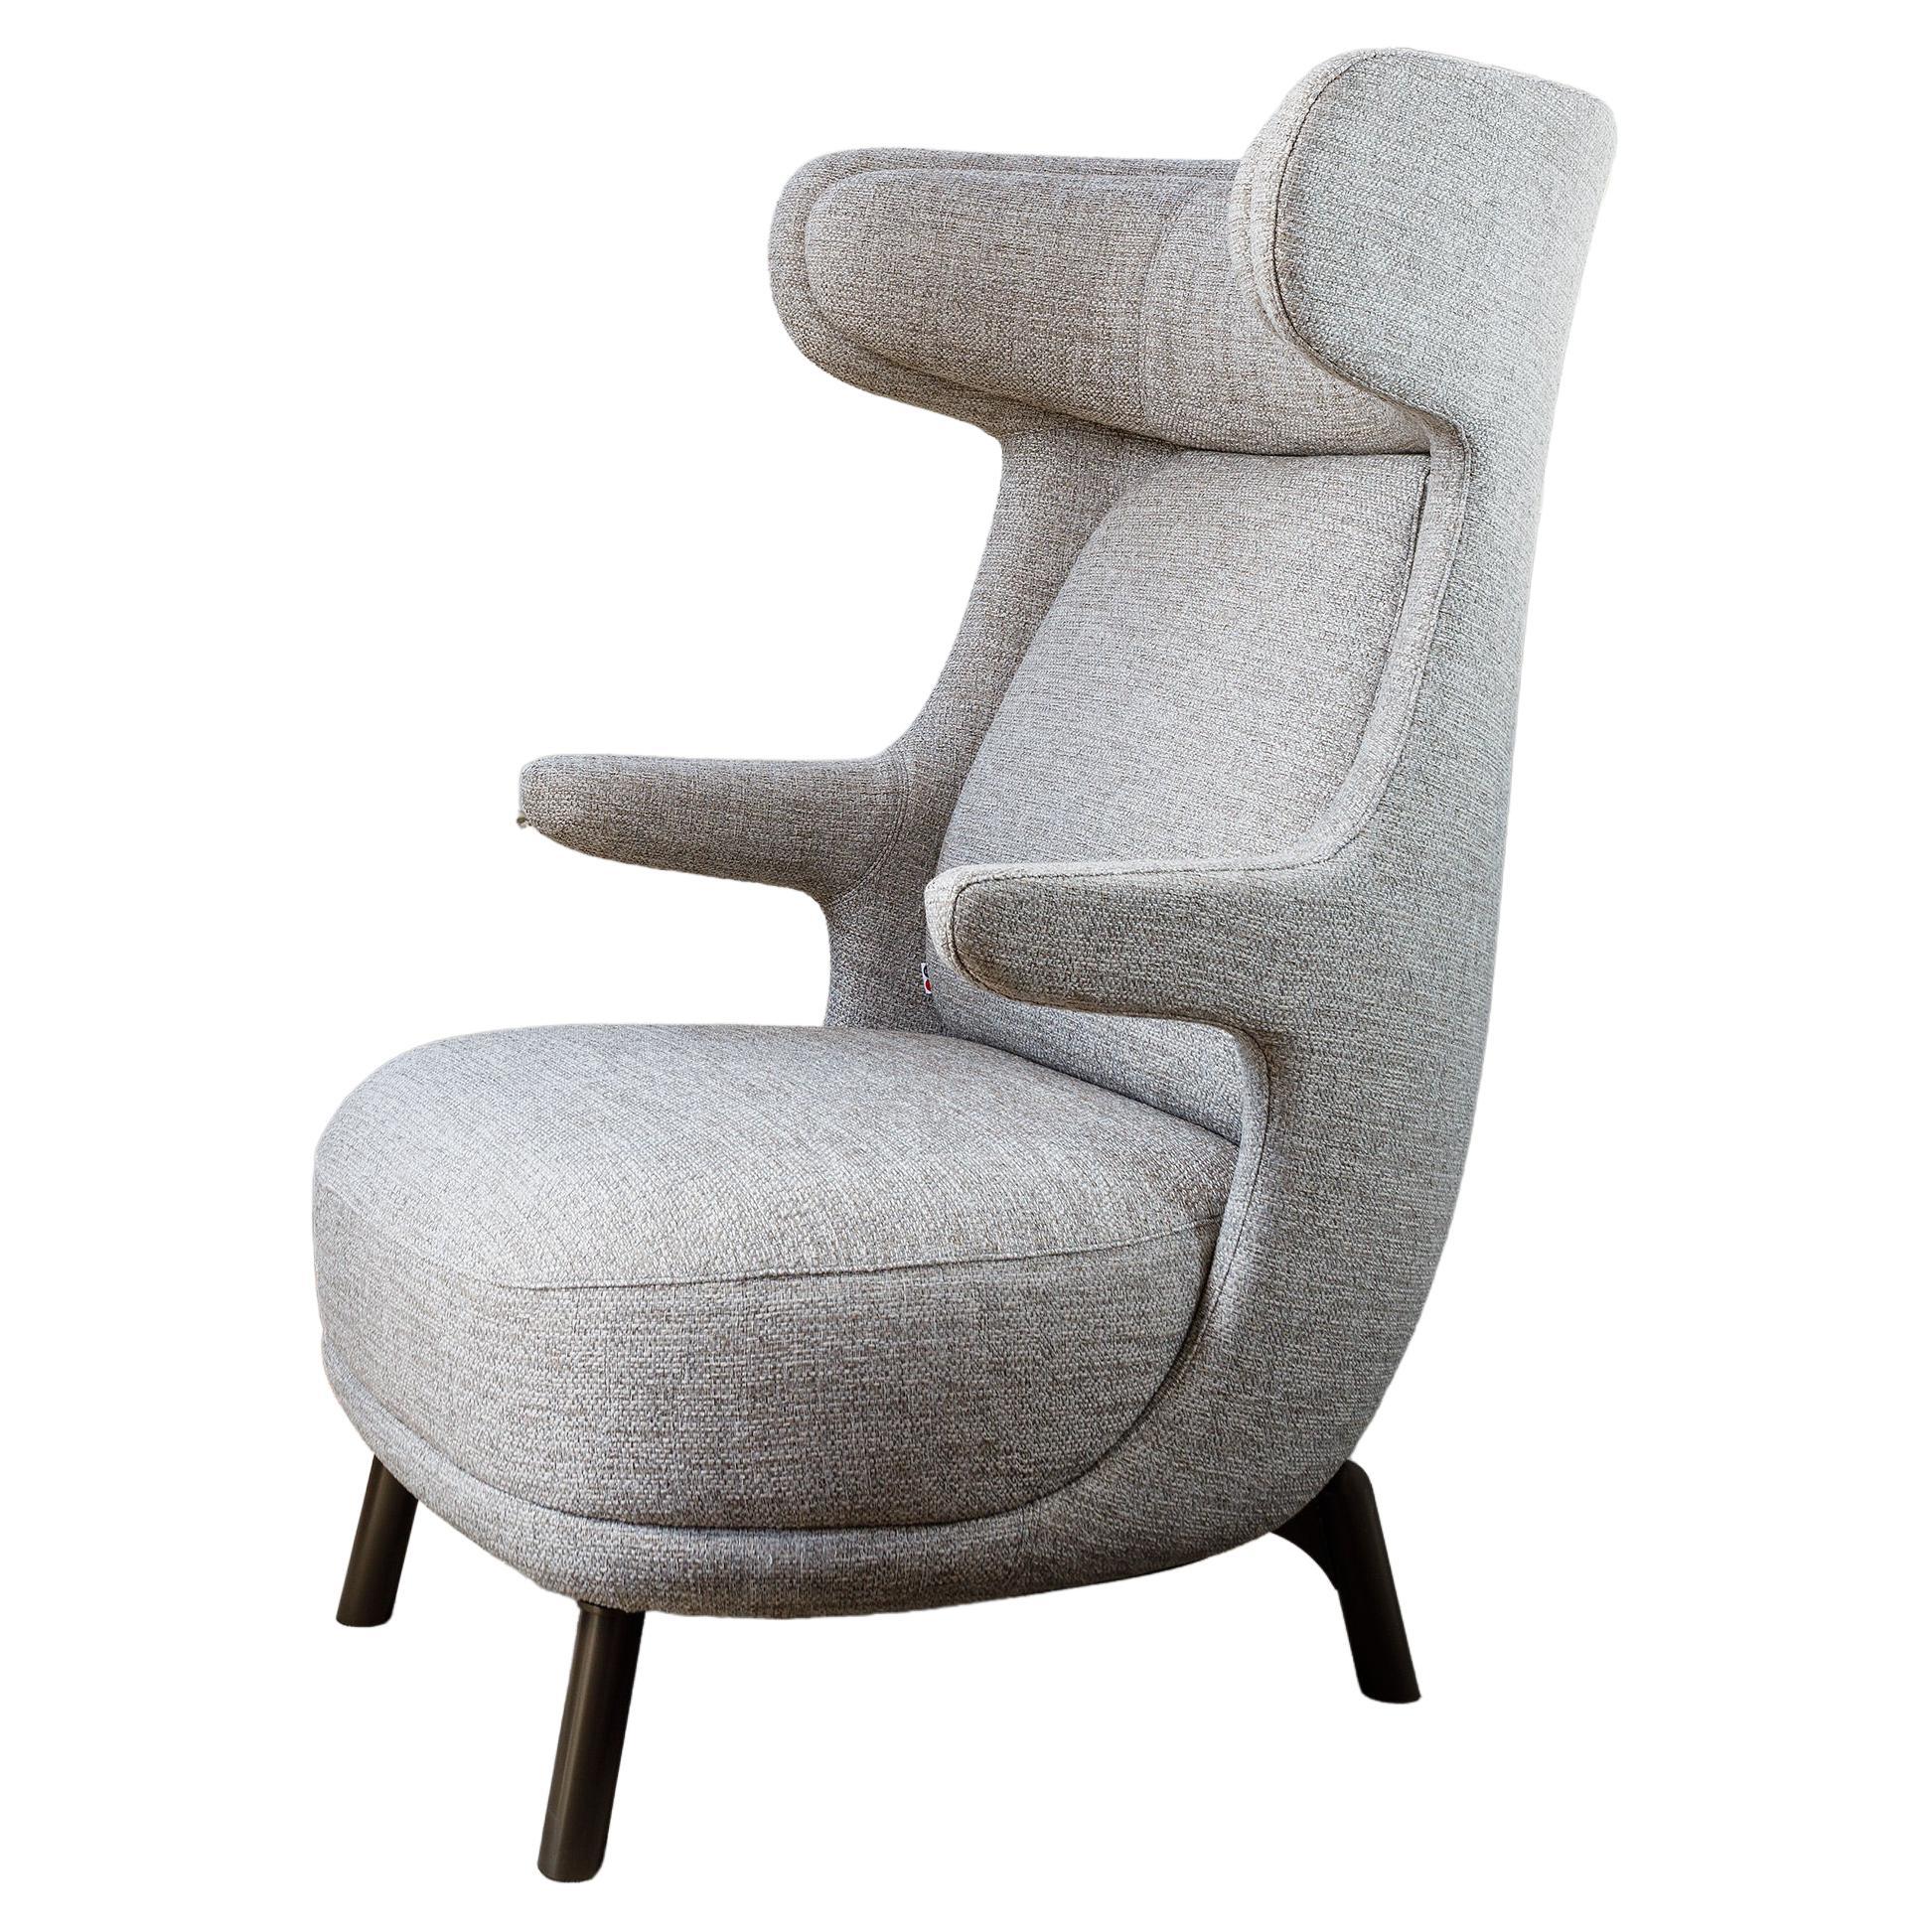 Contemporary Jaime Hayon Grey Dino Living Room Armchair Fabric Upholstered  For Sale